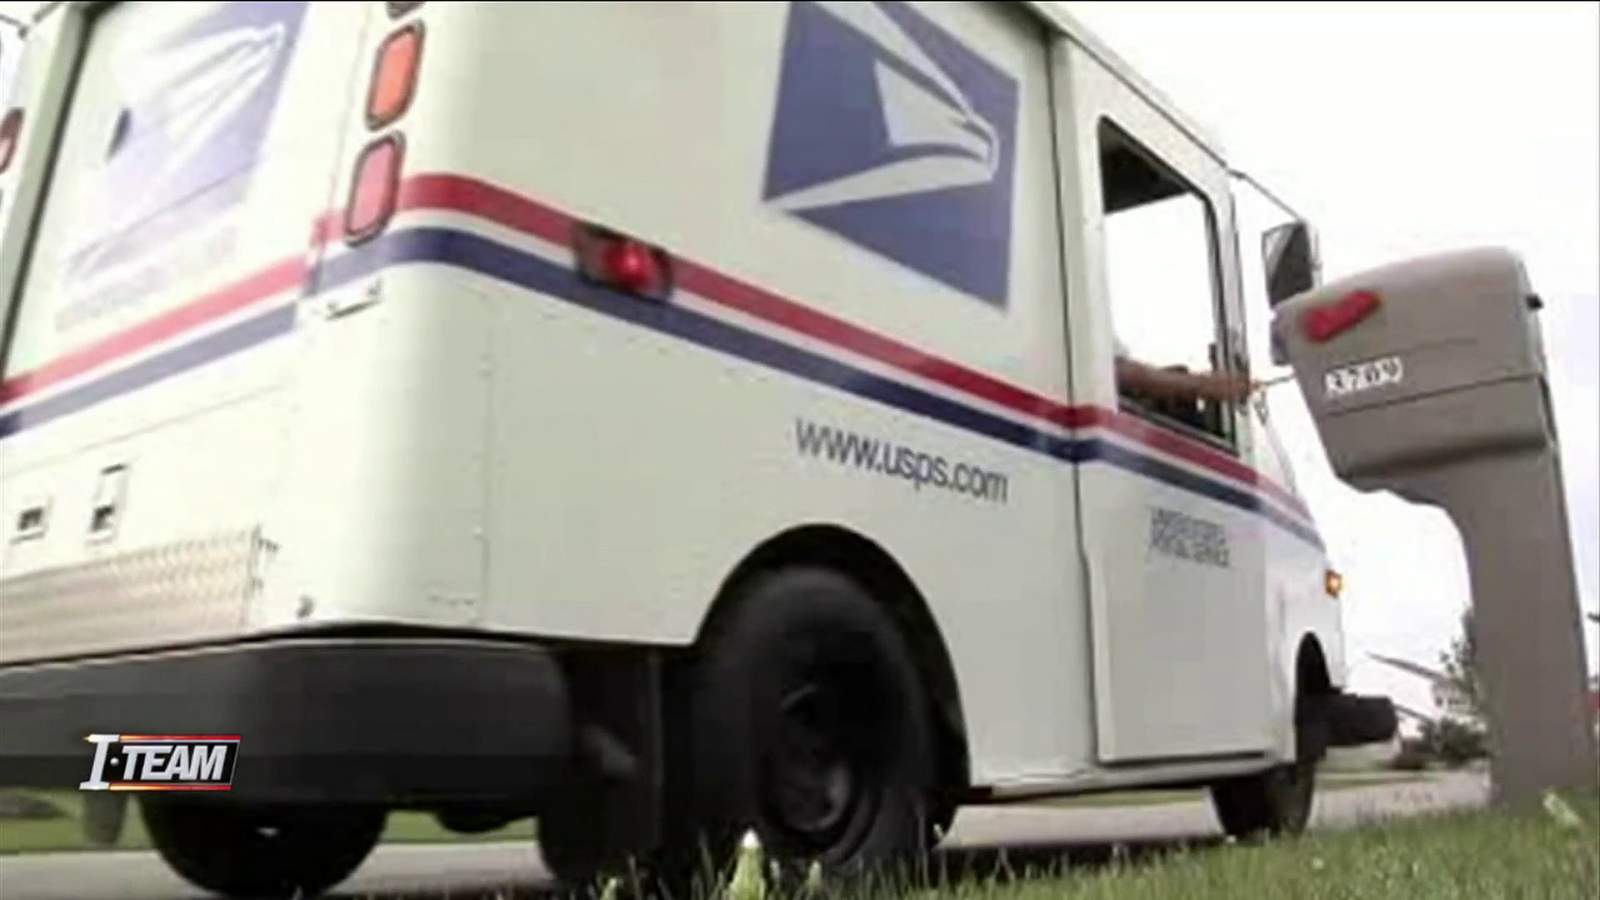 Federal judge orders USPS to lift limits on extra trips & overtime one week before election